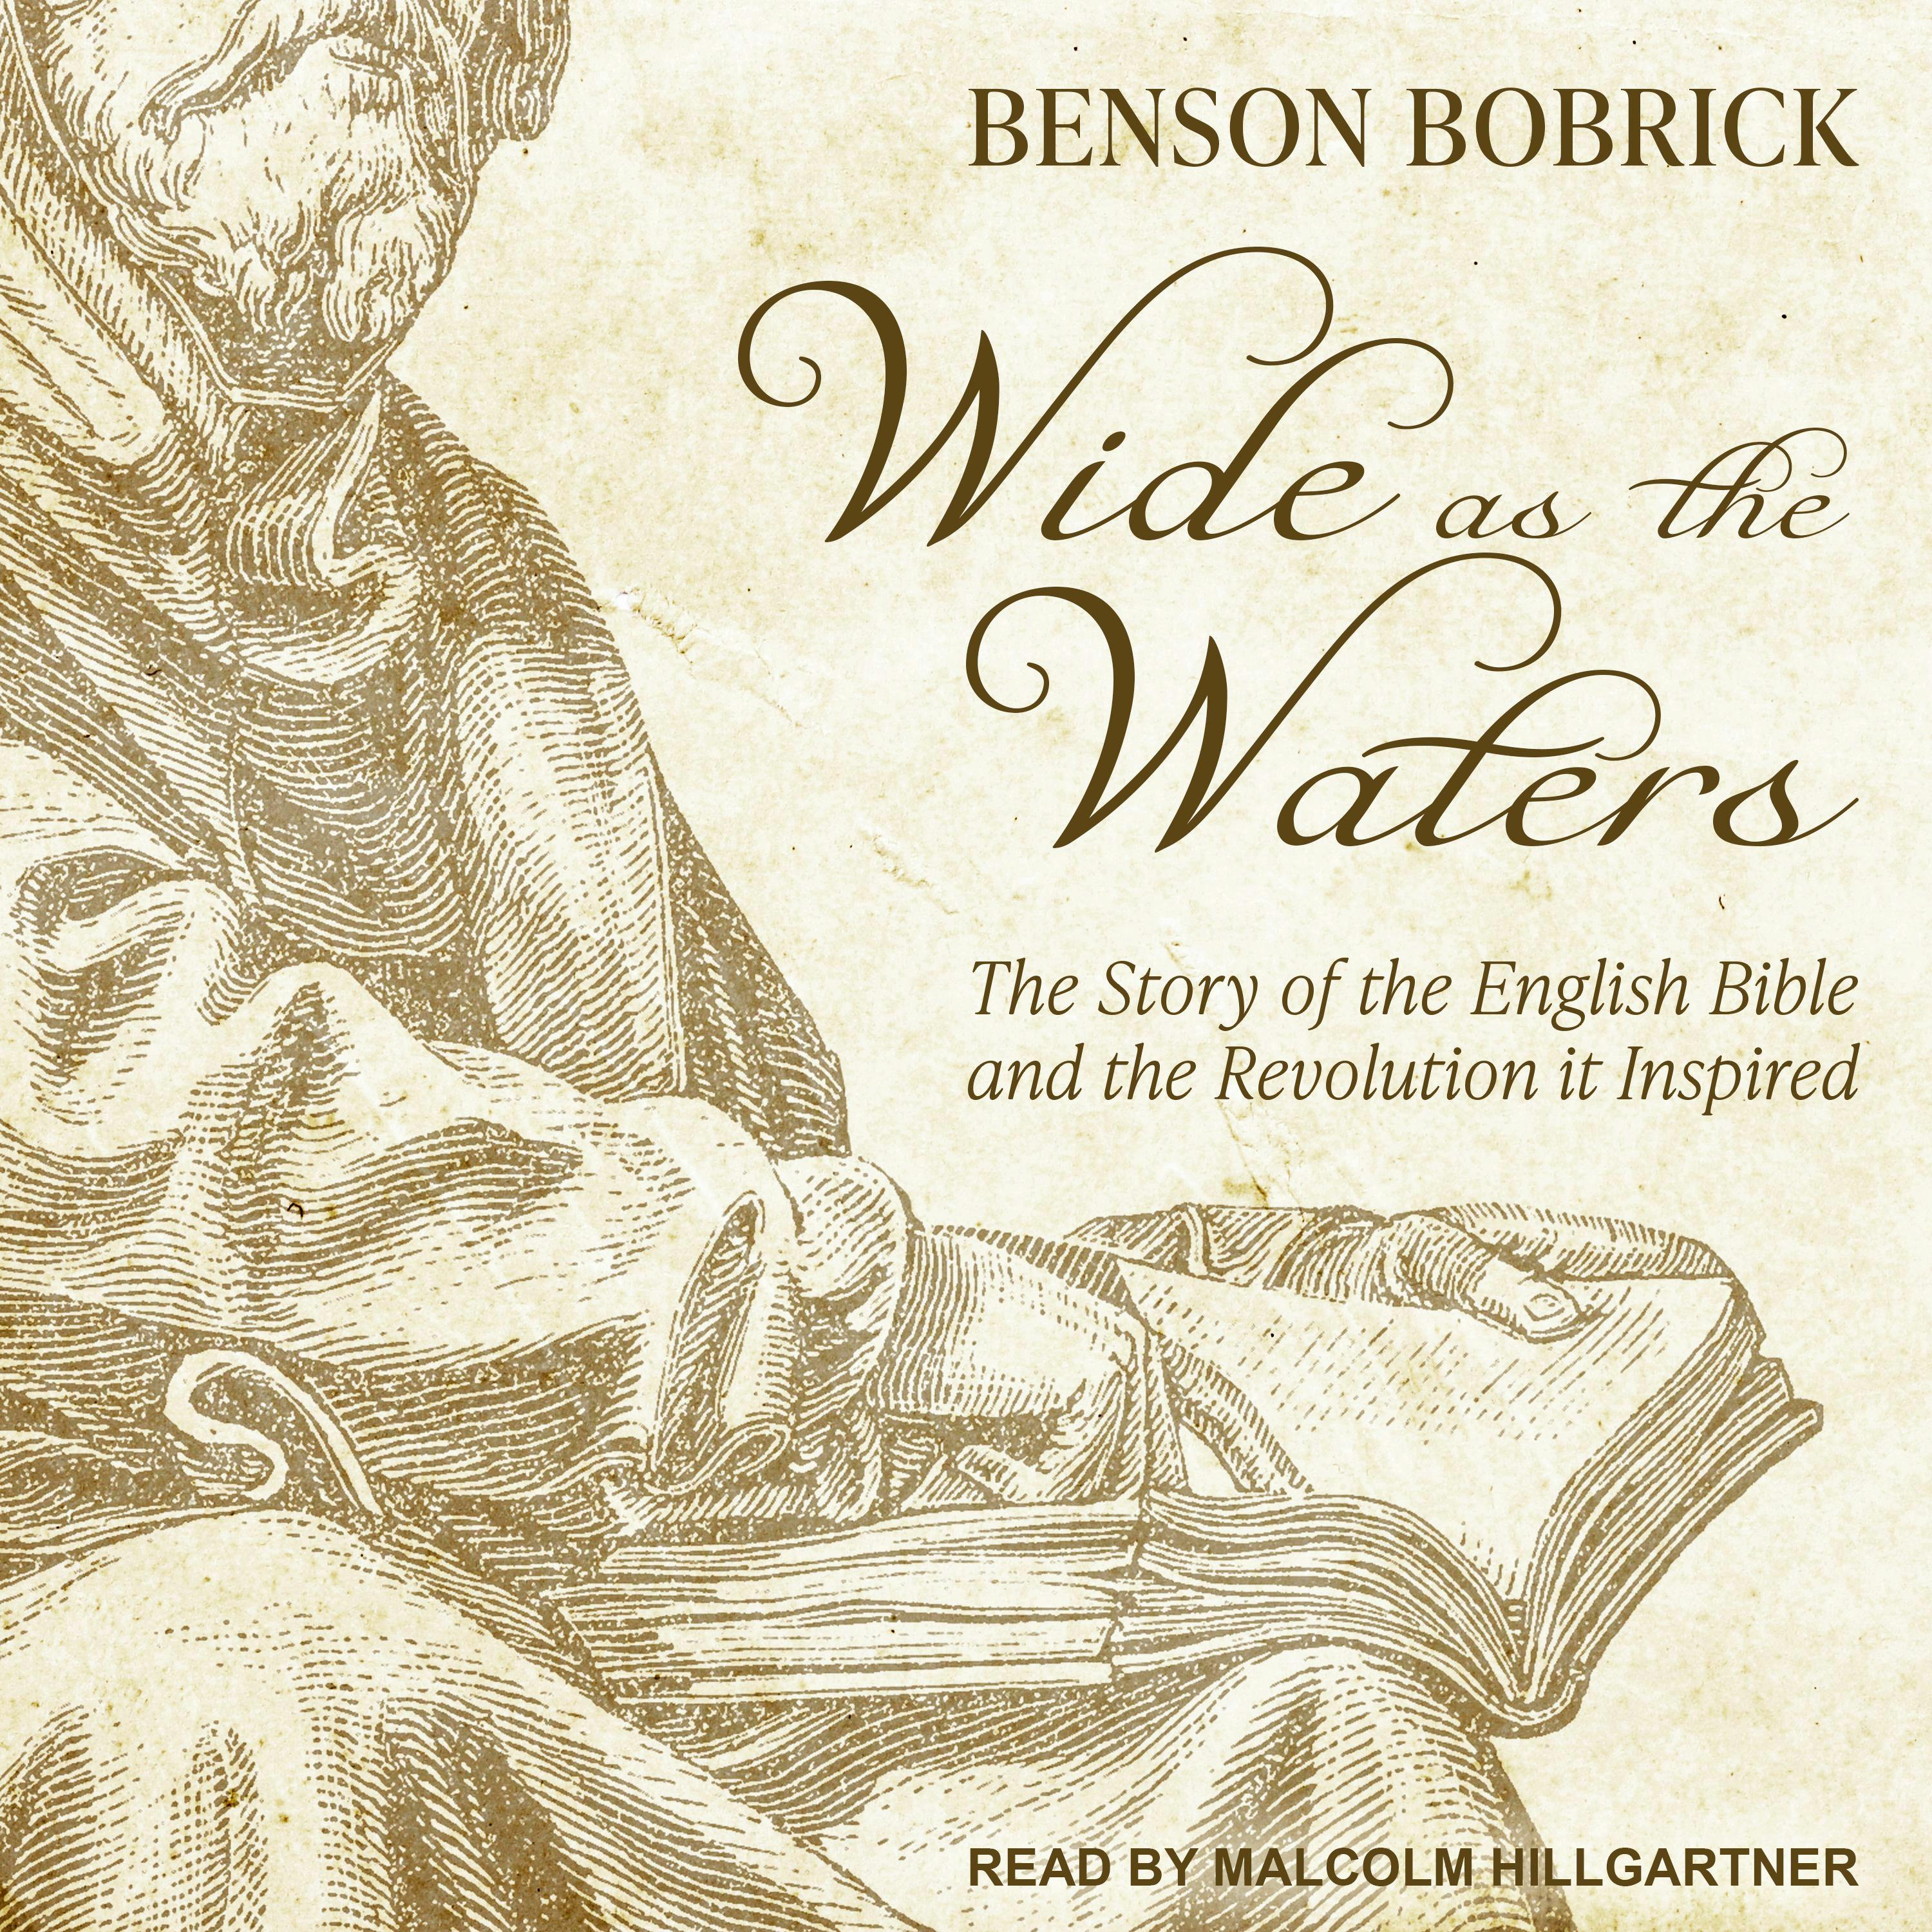 Wide as the Waters: The Story of the English Bible and the Revolution it Inspired - Benson Bobrick